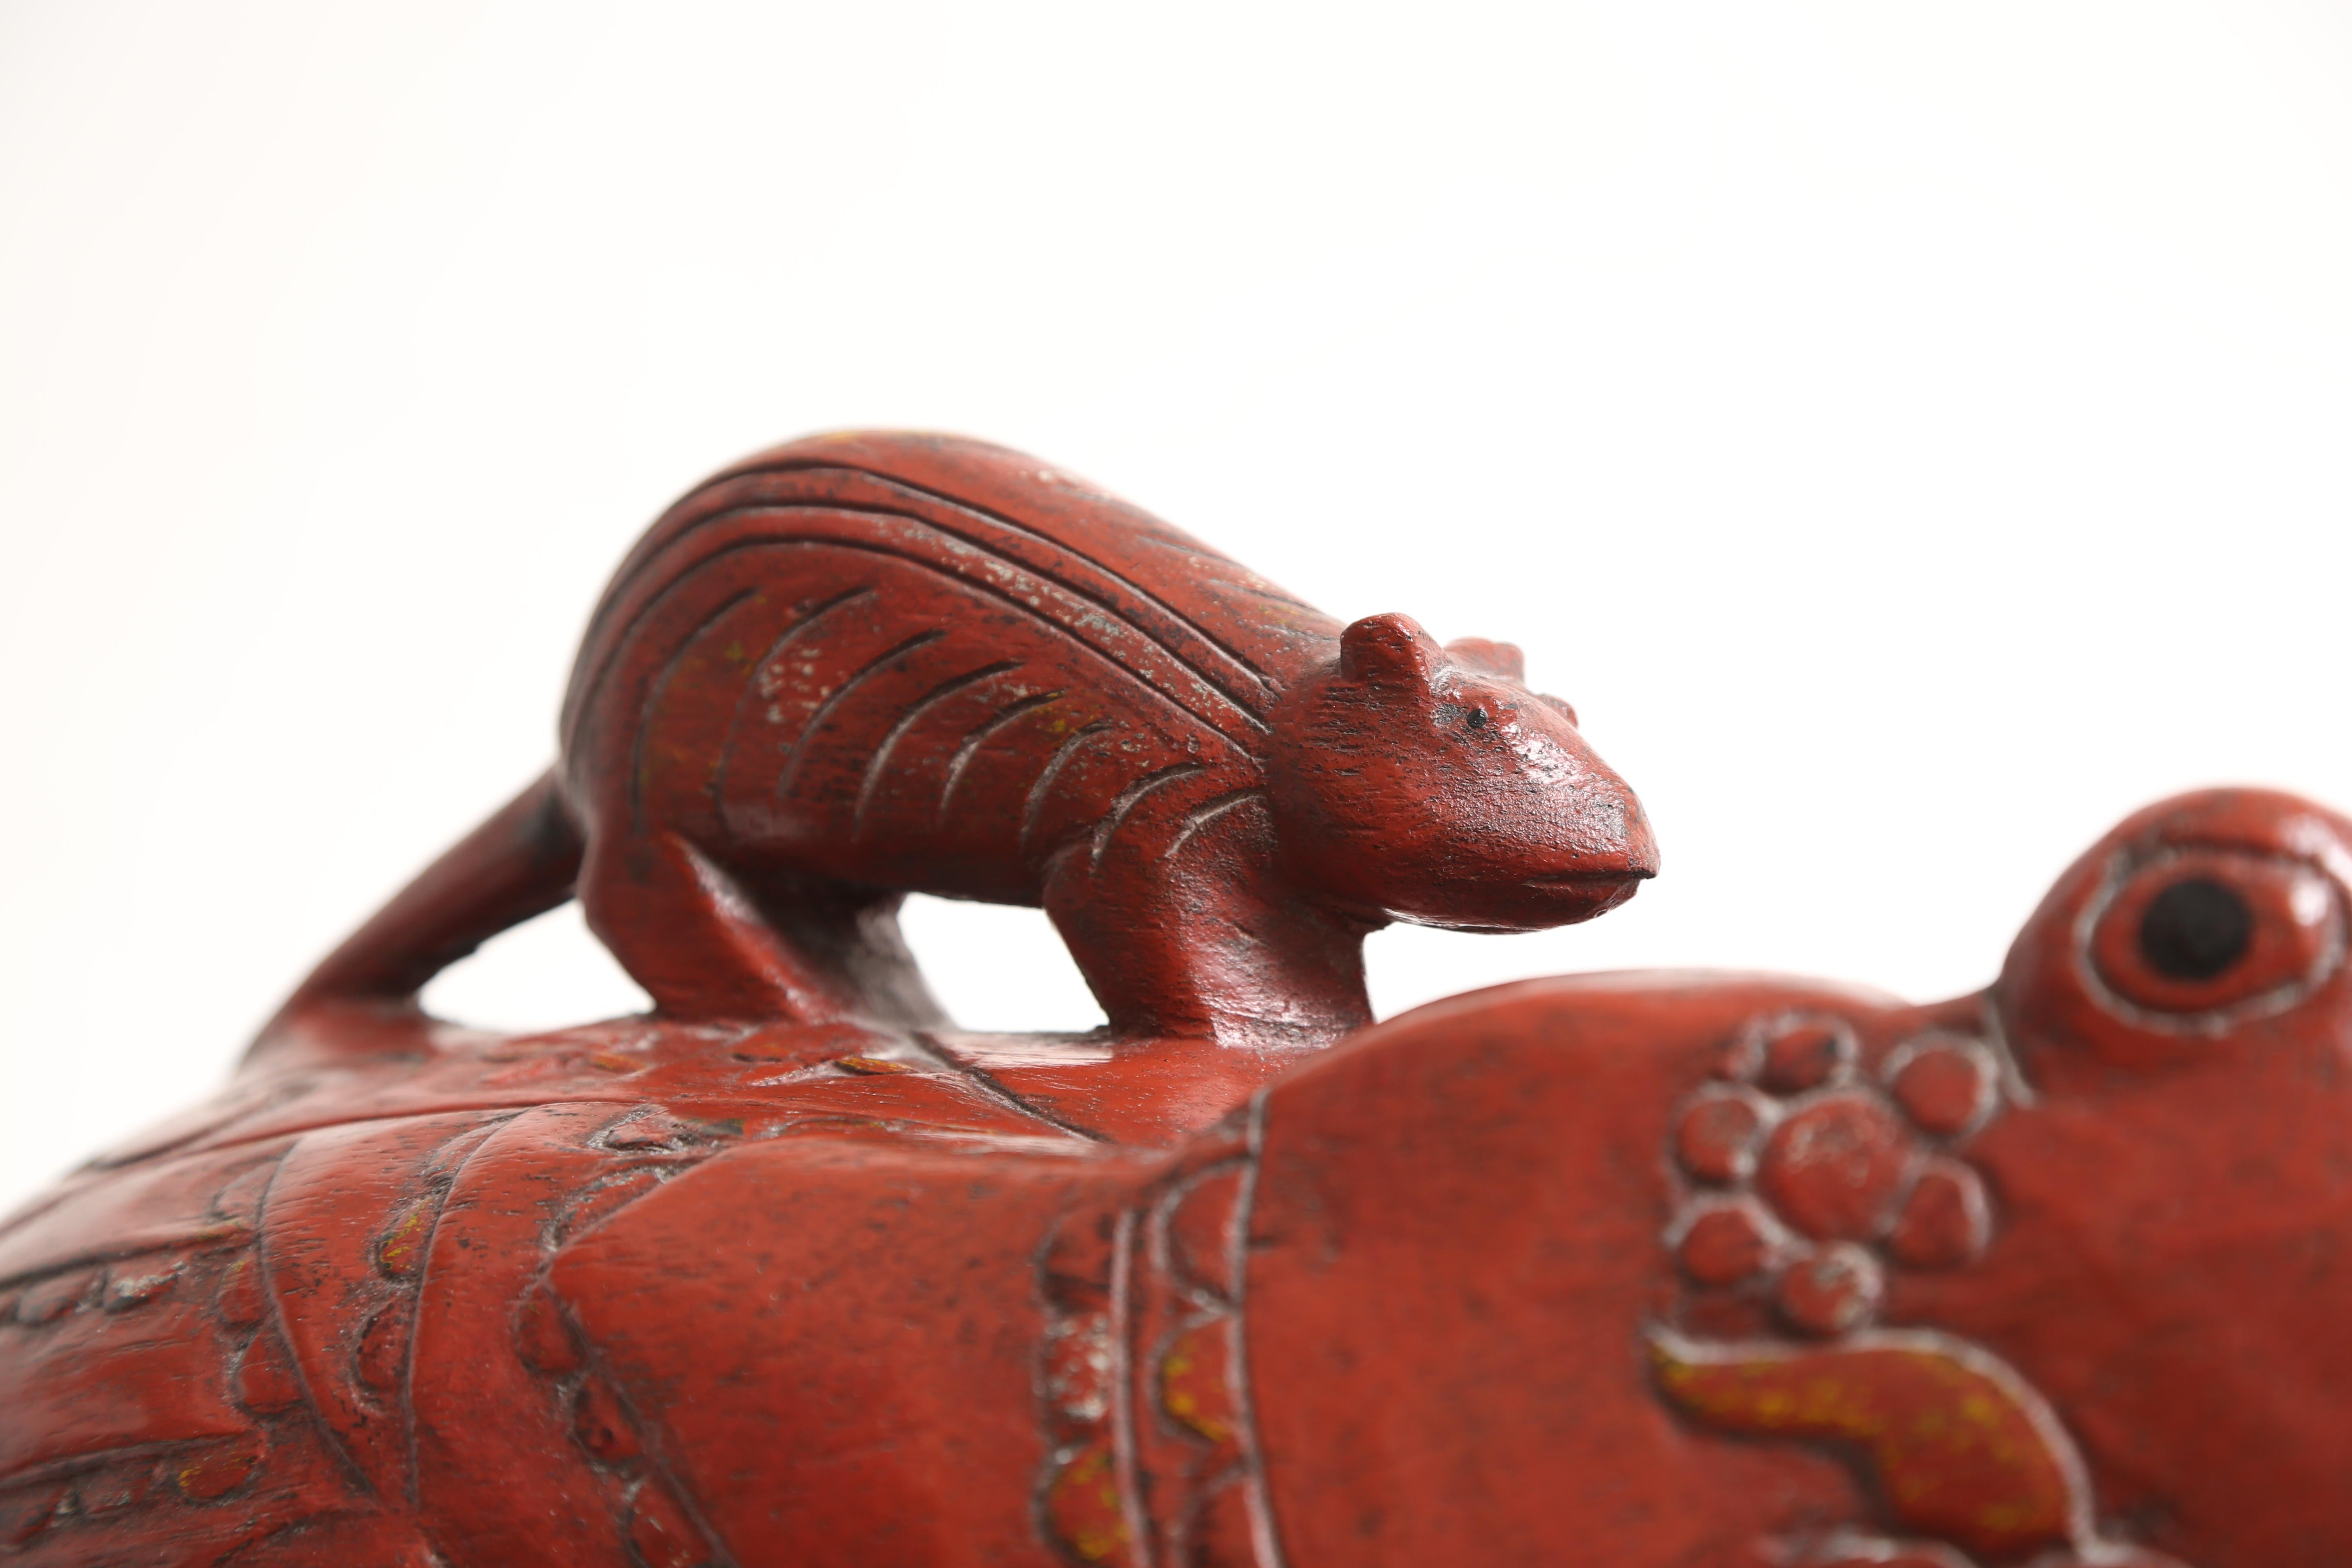 A great table-top object.
This example exhibits a lovely patinated finish.
Mouse riding on a frog's back.